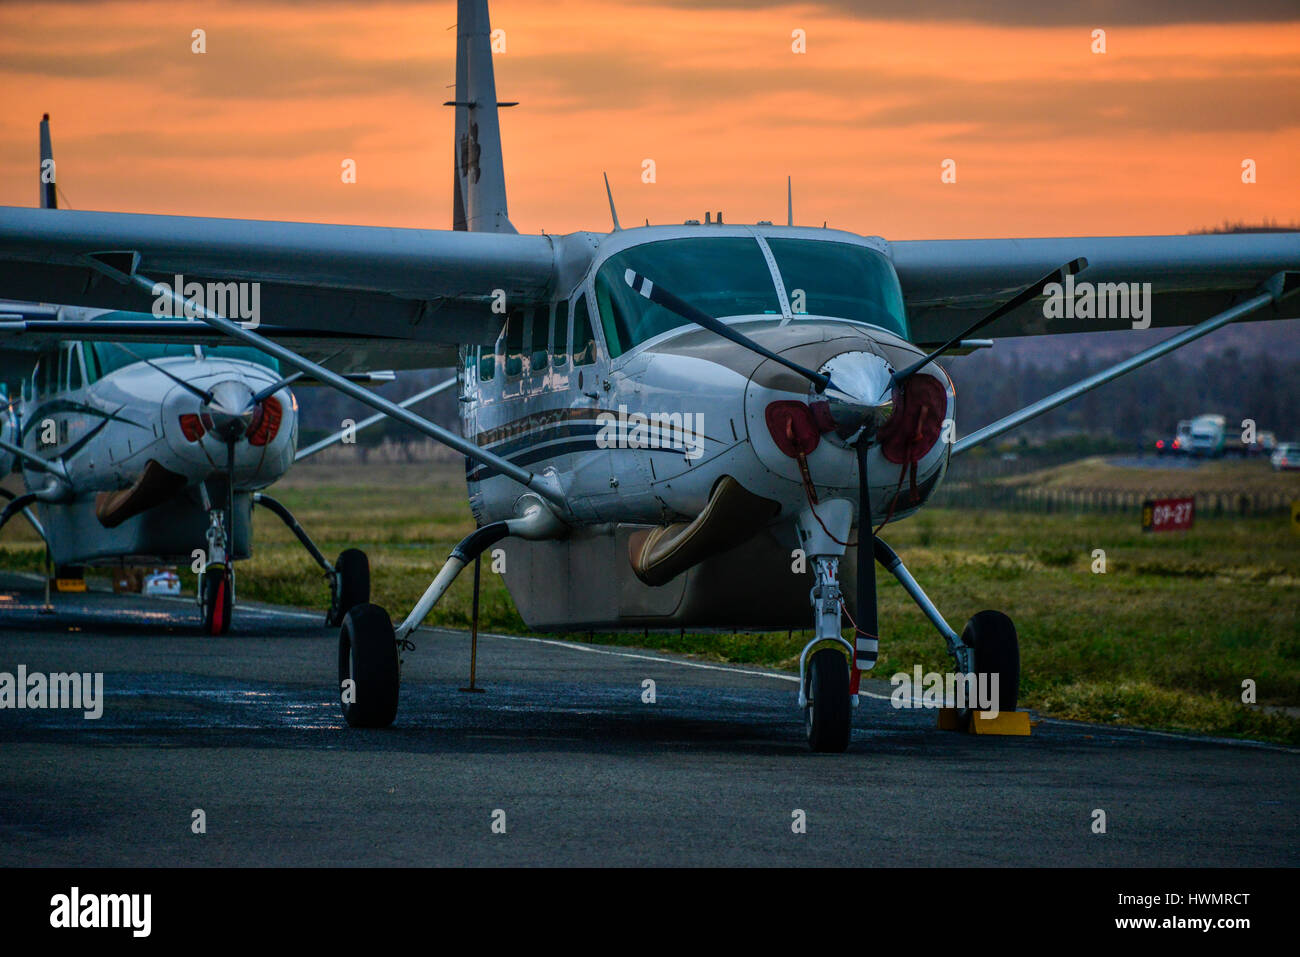 The sun sets behind two Cessna 208 Caravan aircraft at Arusha airport in Tanzania, Africa. Stock Photo